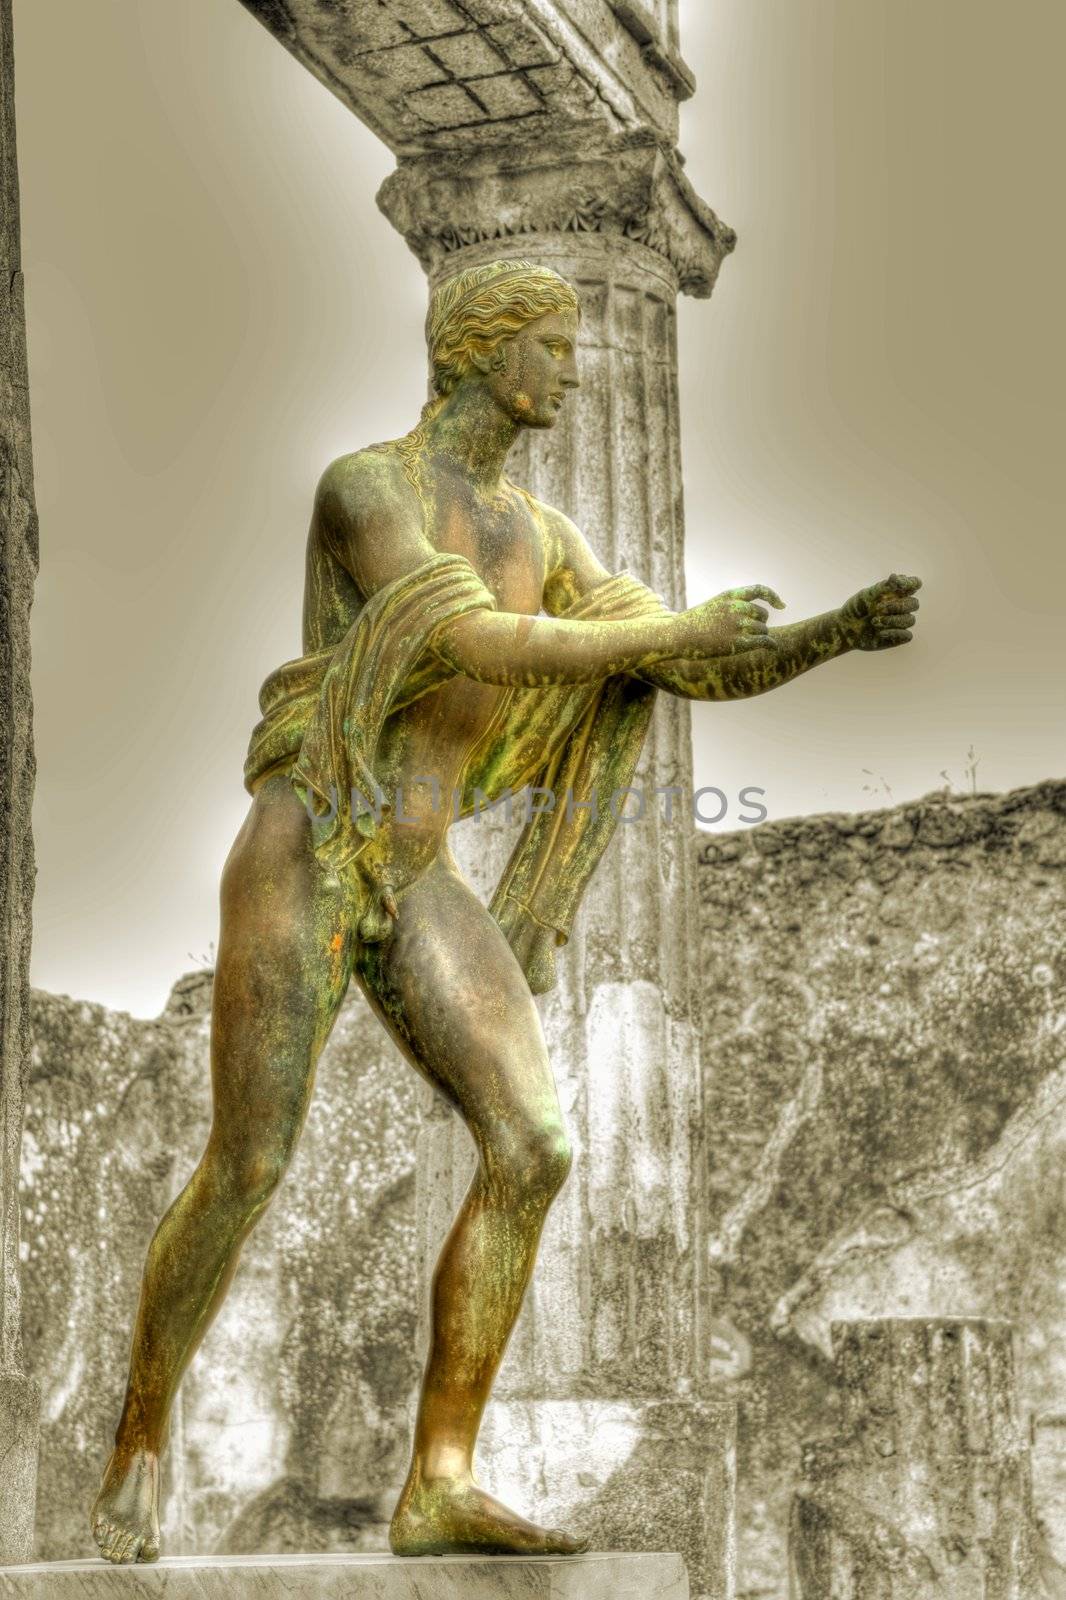 A statue from Pompeii processed with selective color on the statue.